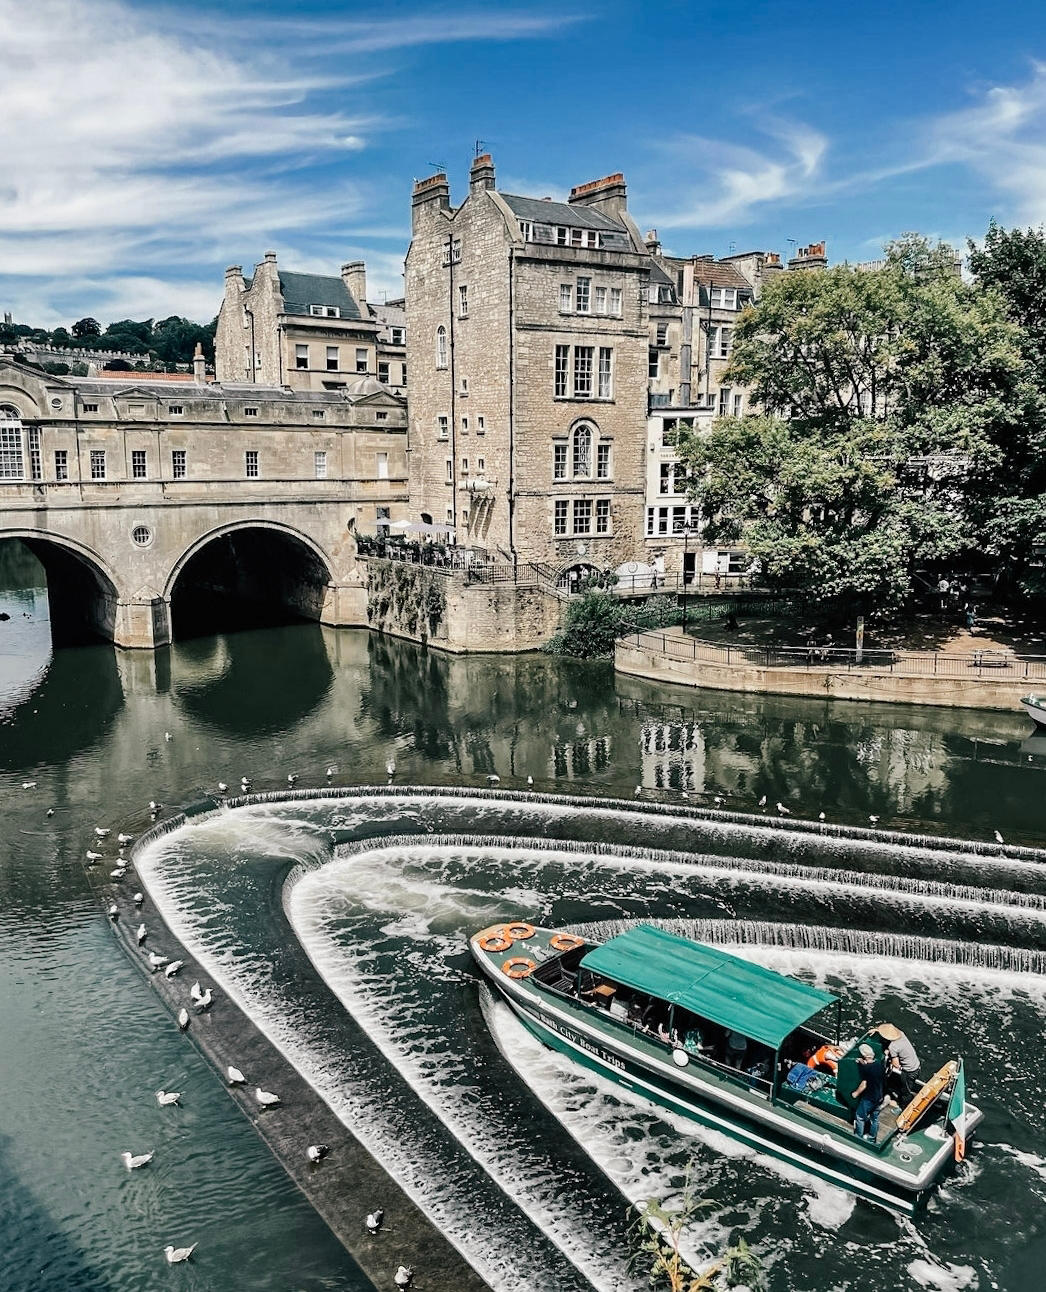 The Gainsborough Bath Spa - Synonymous with Bath, Pulteney Bridge is an attraction that must be visited when you are in